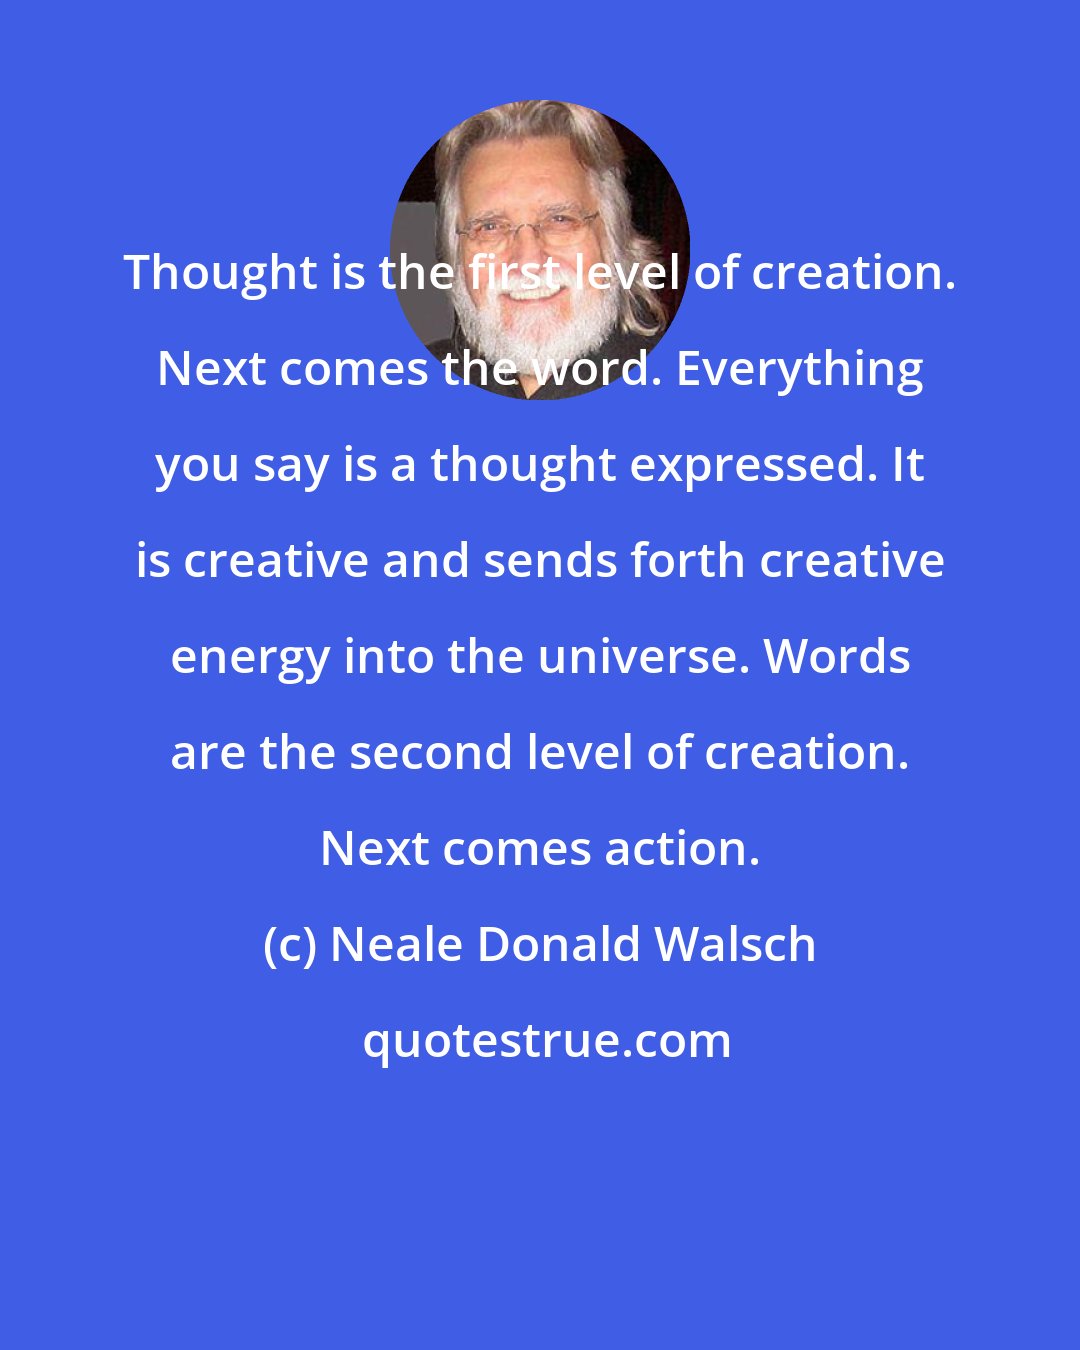 Neale Donald Walsch: Thought is the first level of creation. Next comes the word. Everything you say is a thought expressed. It is creative and sends forth creative energy into the universe. Words are the second level of creation. Next comes action.